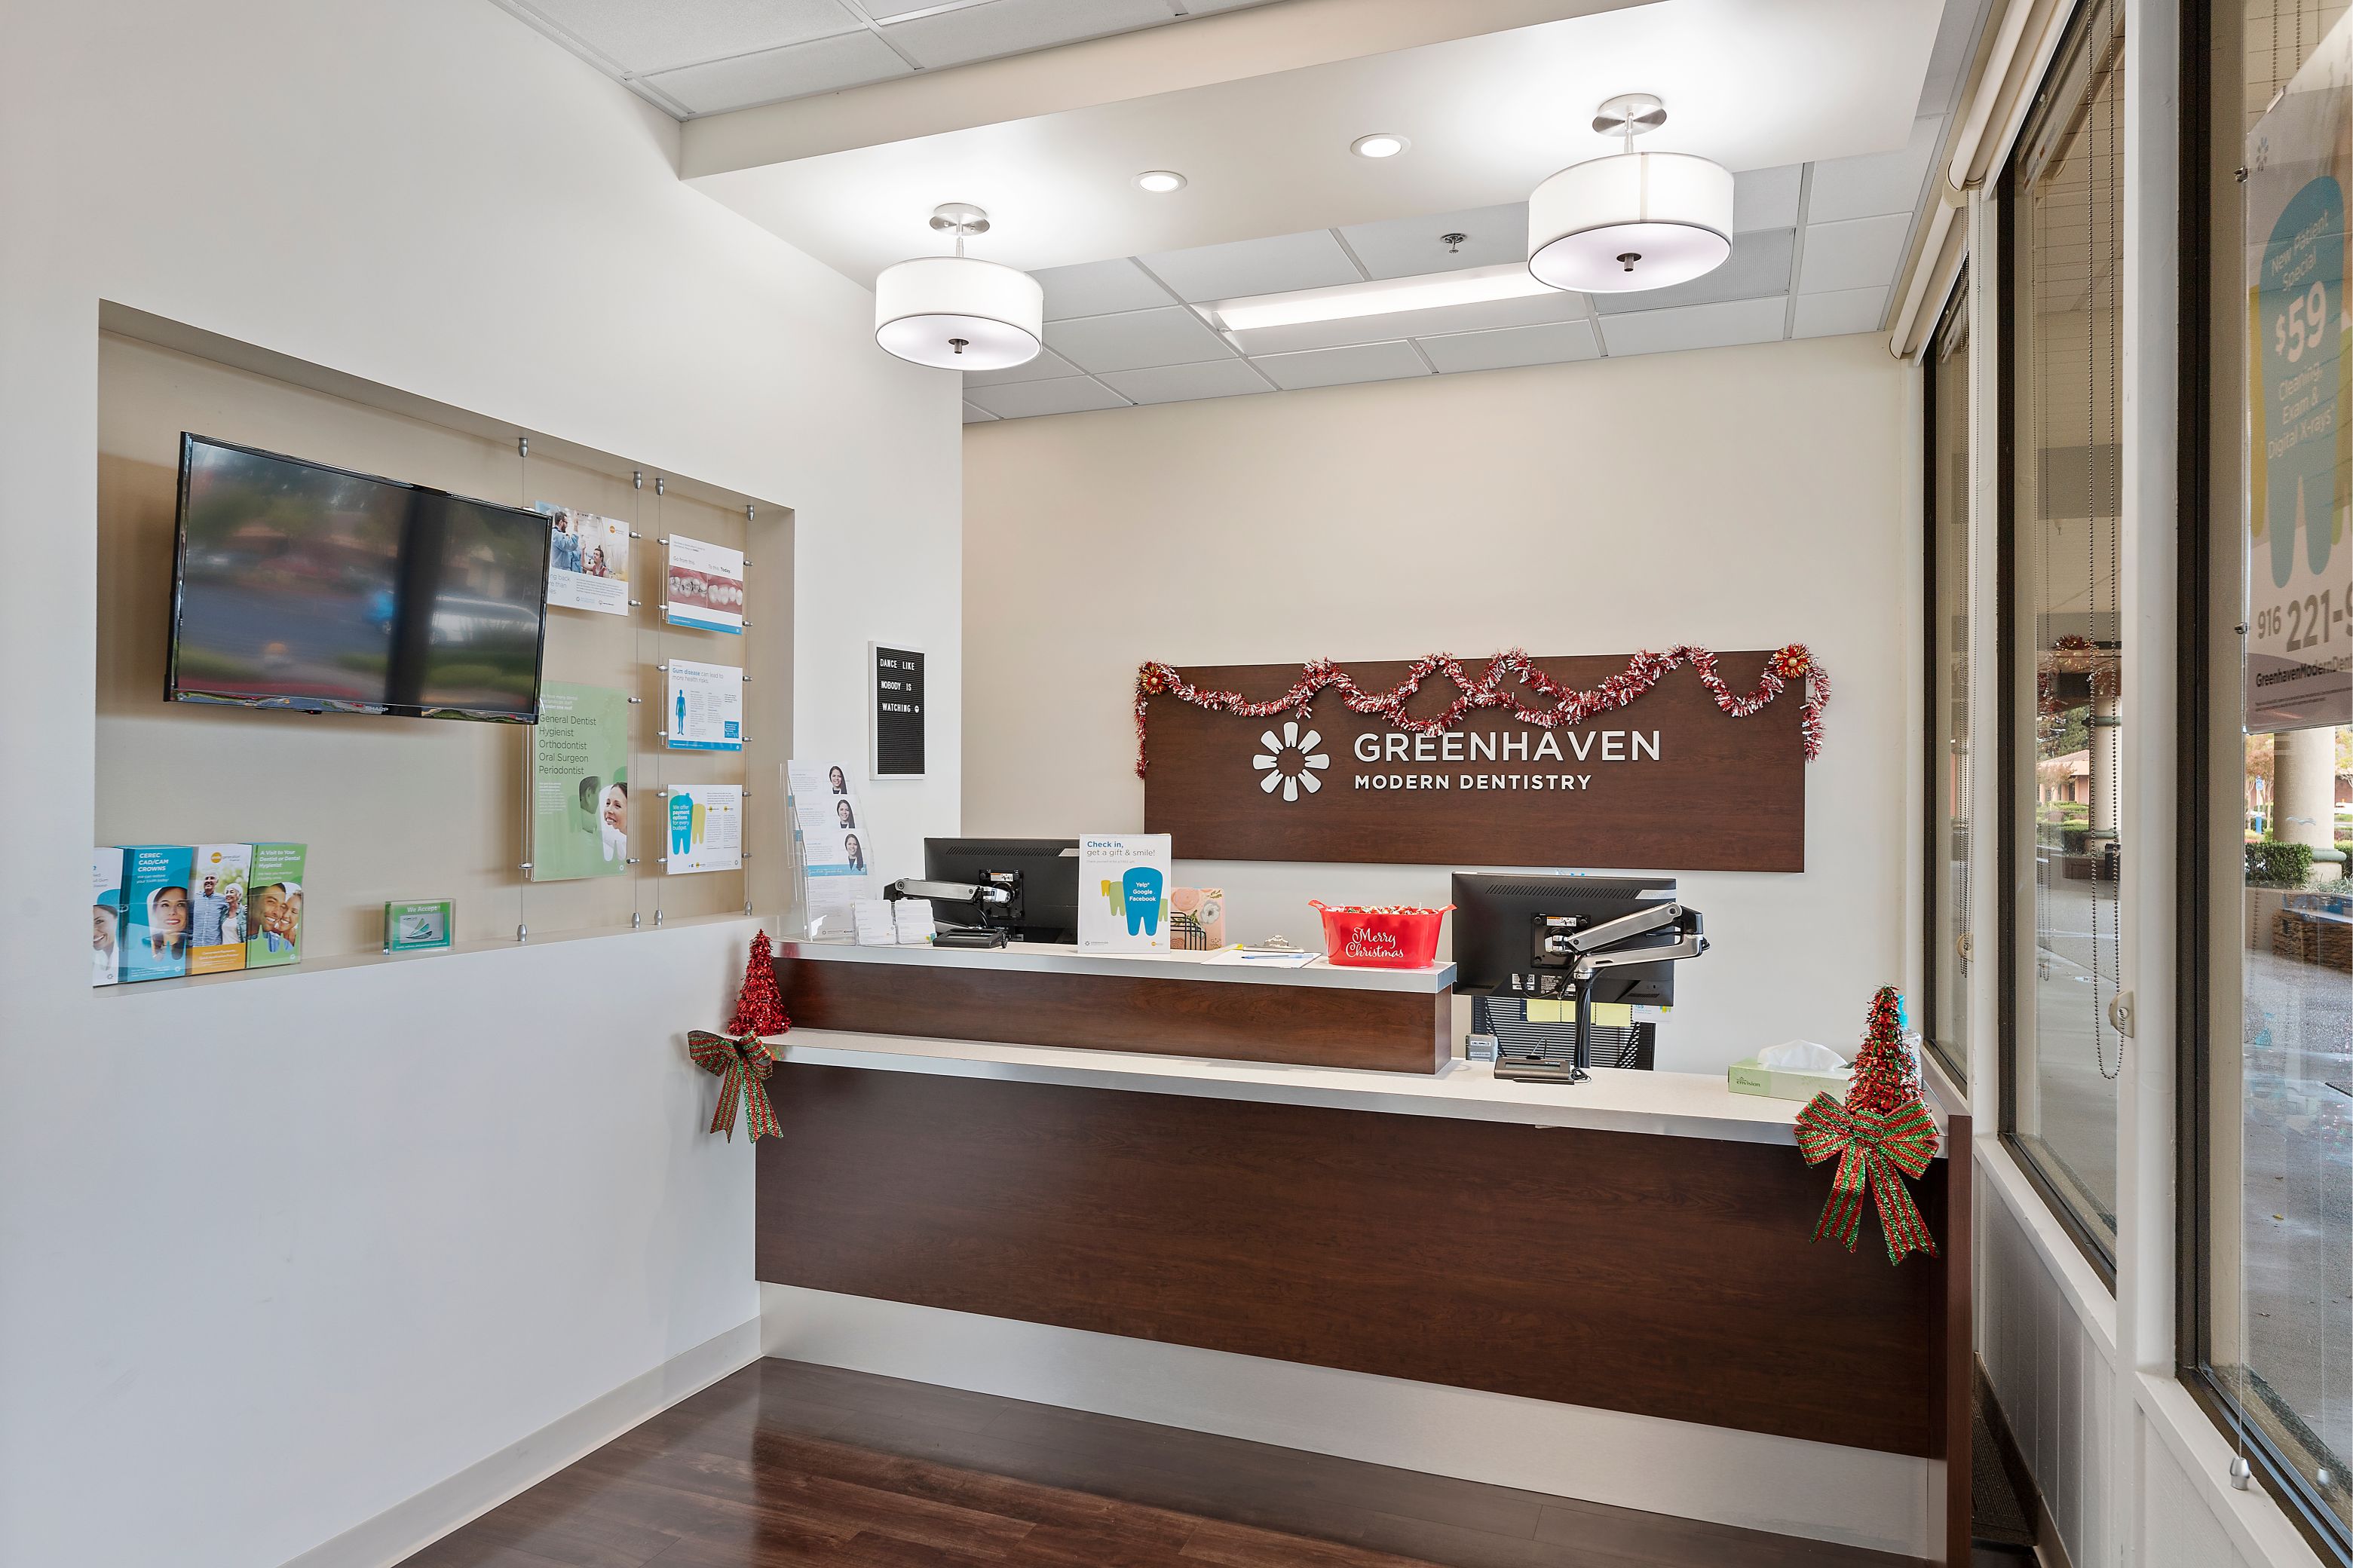 Greenhaven Modern Dentistry opened its doors to the Sacramento community in November 2019!